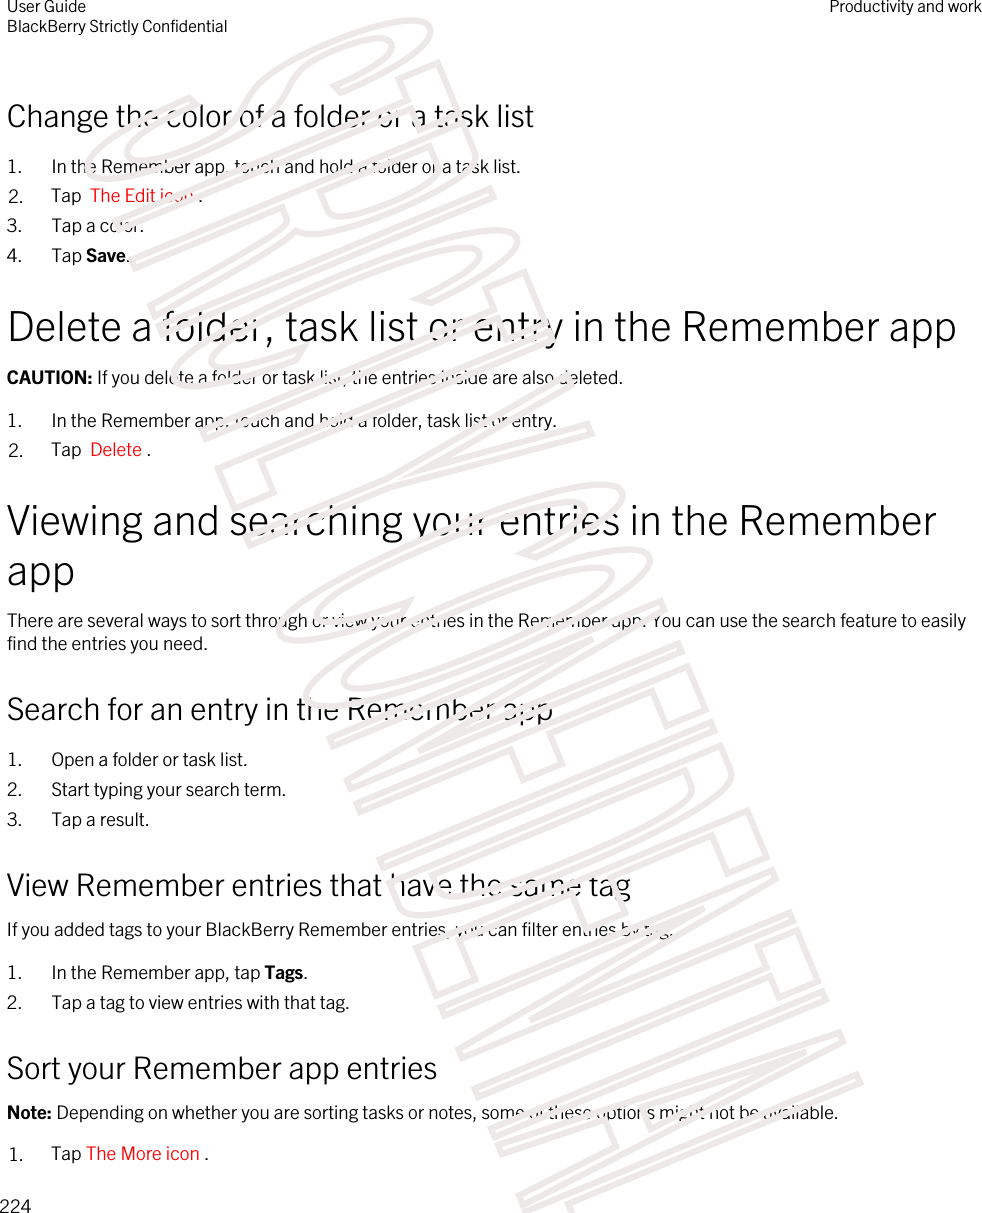 Change the color of a folder or a task list1. In the Remember app, touch and hold a folder or a task list.2. Tap  The Edit icon .3. Tap a color.4. Tap Save.Delete a folder, task list or entry in the Remember appCAUTION: If you delete a folder or task list, the entries inside are also deleted.1. In the Remember app, touch and hold a folder, task list or entry.2. Tap  Delete .Viewing and searching your entries in the Remember appThere are several ways to sort through or view your entries in the Remember app. You can use the search feature to easily find the entries you need.Search for an entry in the Remember app1. Open a folder or task list.2. Start typing your search term.3. Tap a result.View Remember entries that have the same tagIf you added tags to your BlackBerry Remember entries, you can filter entries by tag.1. In the Remember app, tap Tags.2. Tap a tag to view entries with that tag.Sort your Remember app entriesNote: Depending on whether you are sorting tasks or notes, some of these options might not be available.1. Tap The More icon . User GuideBlackBerry Strictly ConfidentialProductivity and work224STRICTLY CONFIDENTIAL